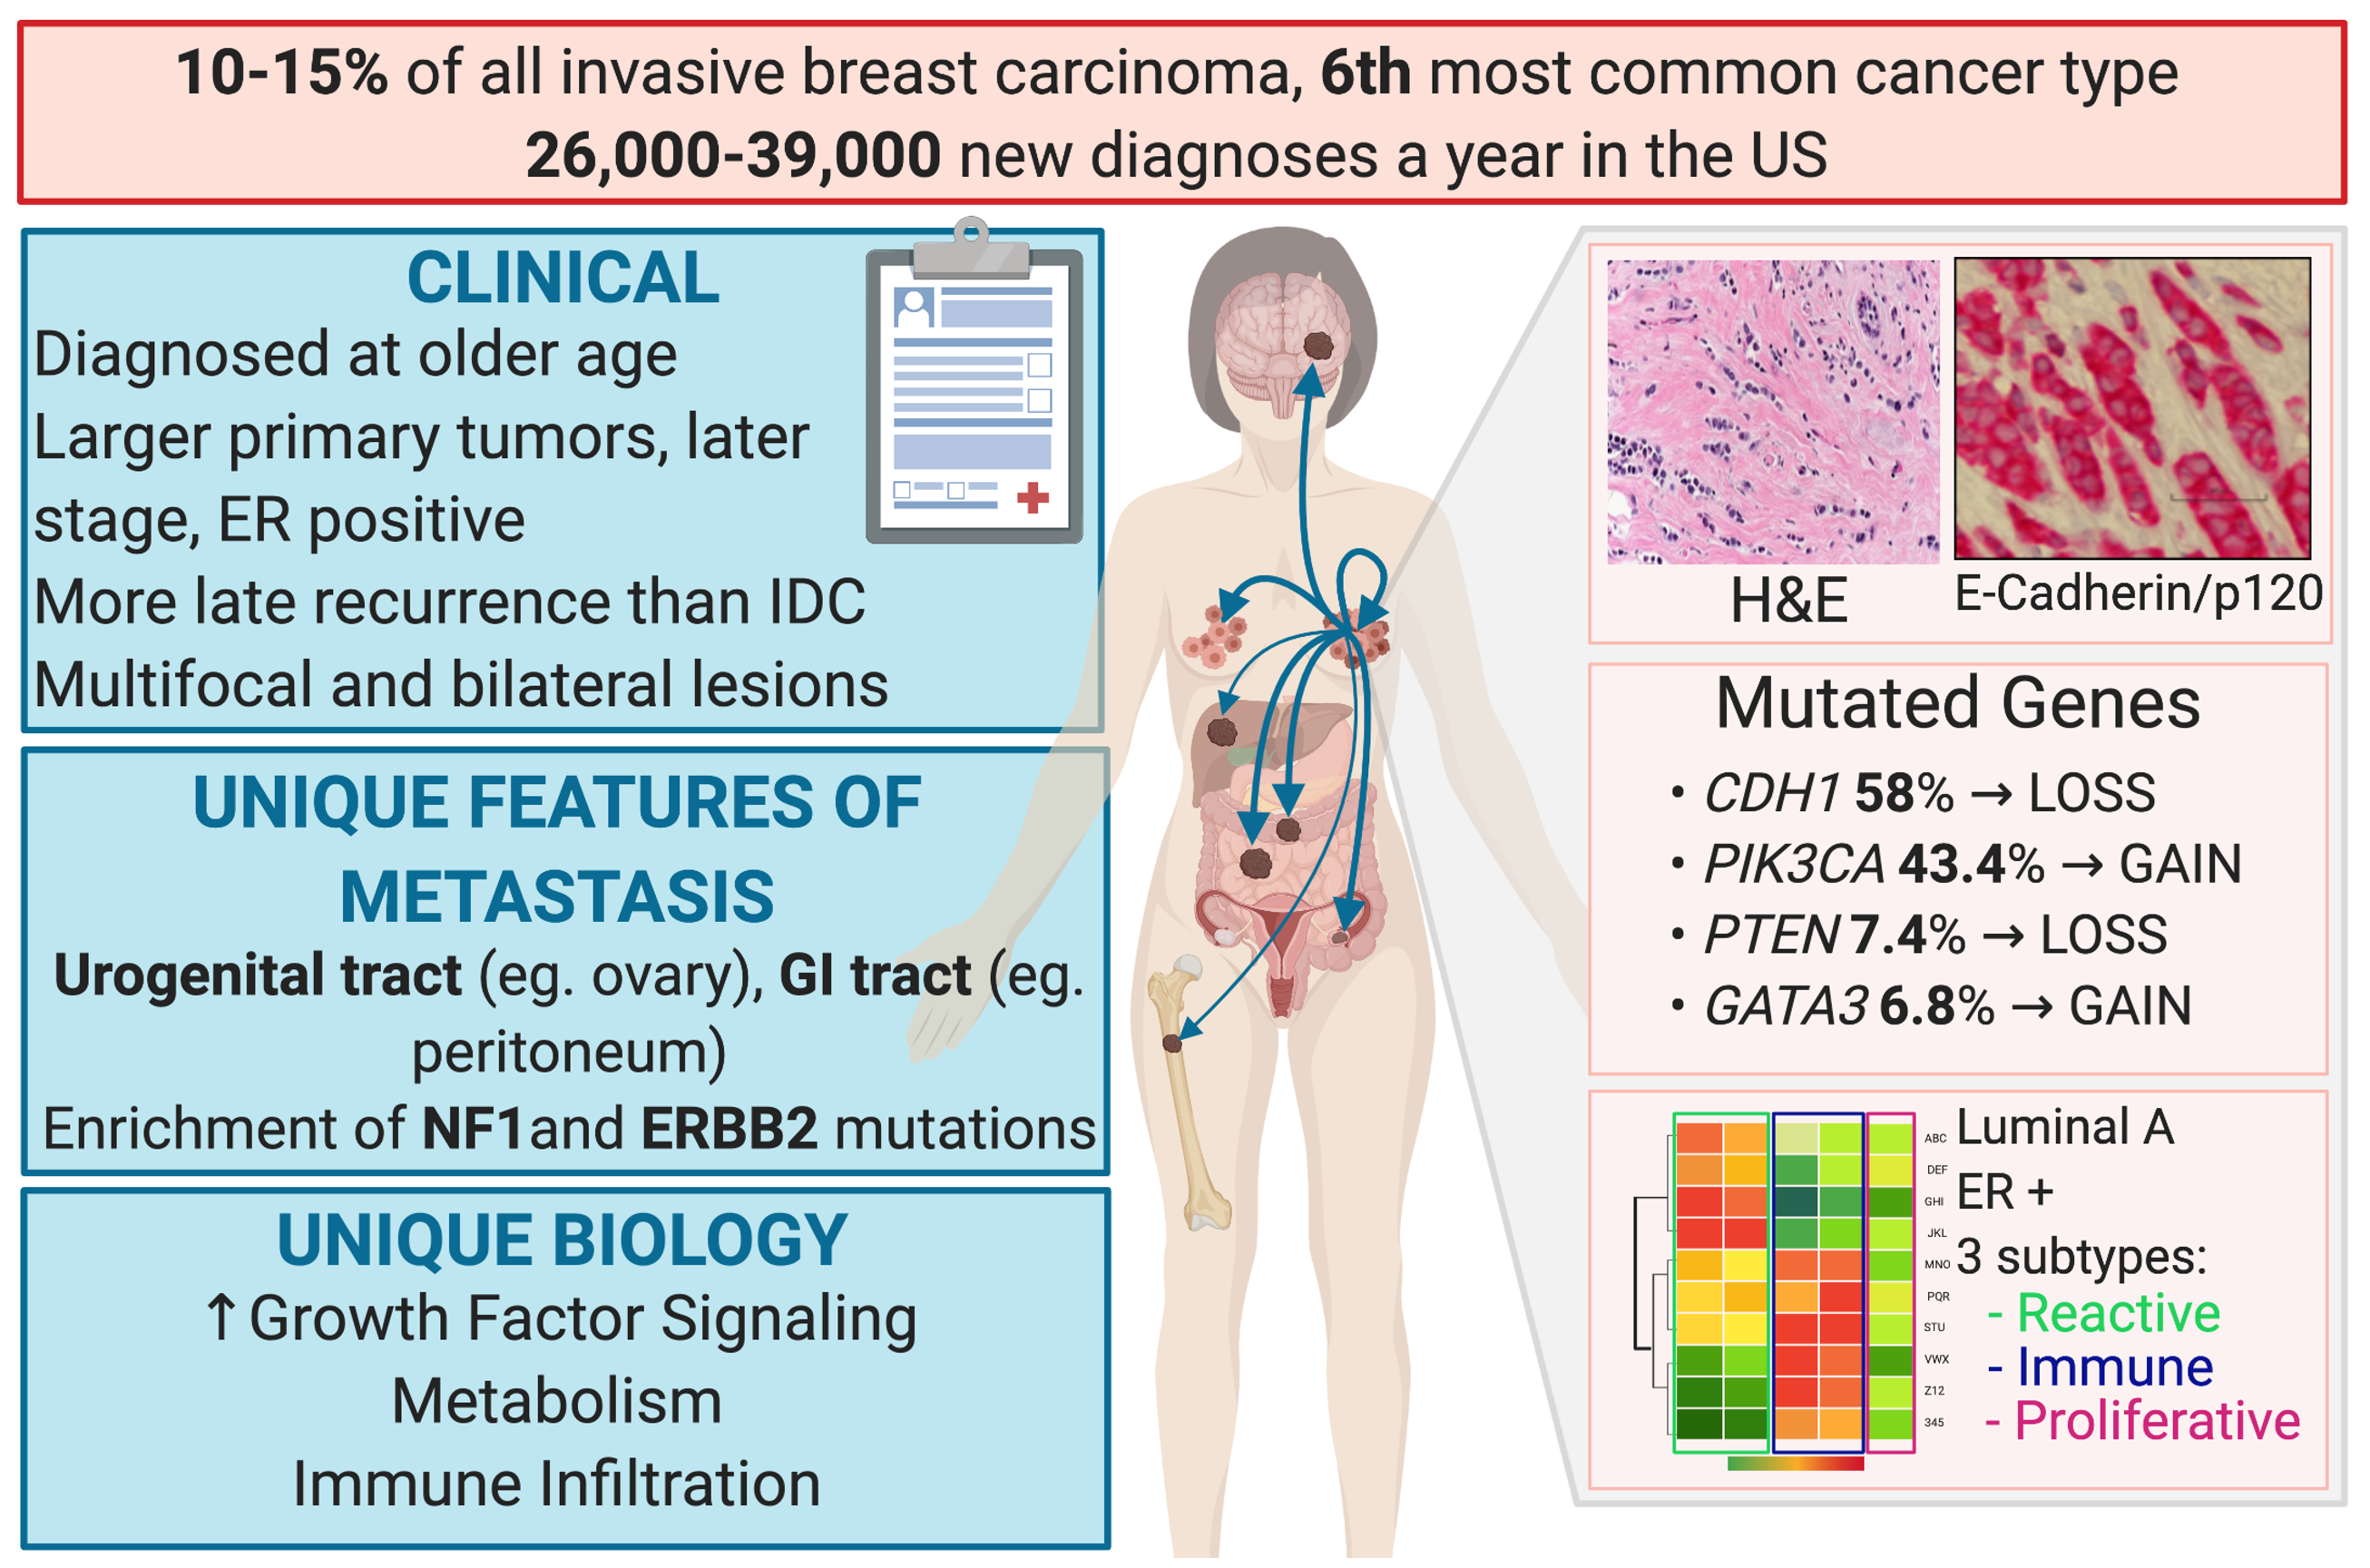 Most Common Breast Cancer Types: Carcinomas